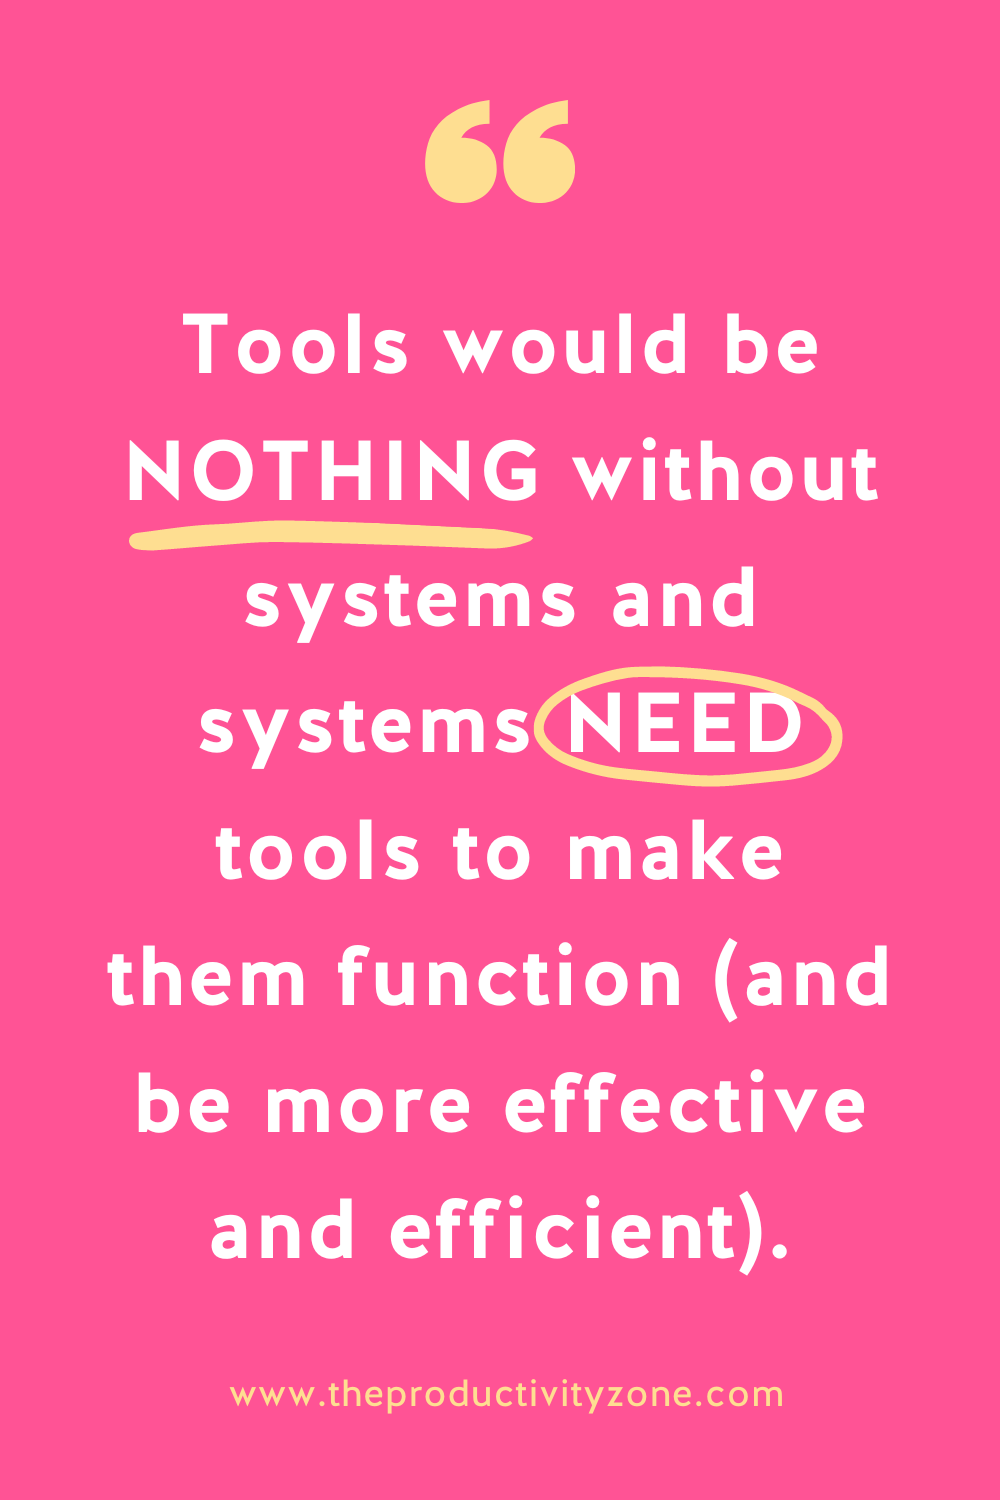 Text graphic featuring white text on a hot pink background. The text reads: "Tools would be NOTHING without systems and systems NEED tools to make them function (and be more effective and efficient)." The word NOTHING has a thick yellow line under it. The word NEED has a yellow circle around it.